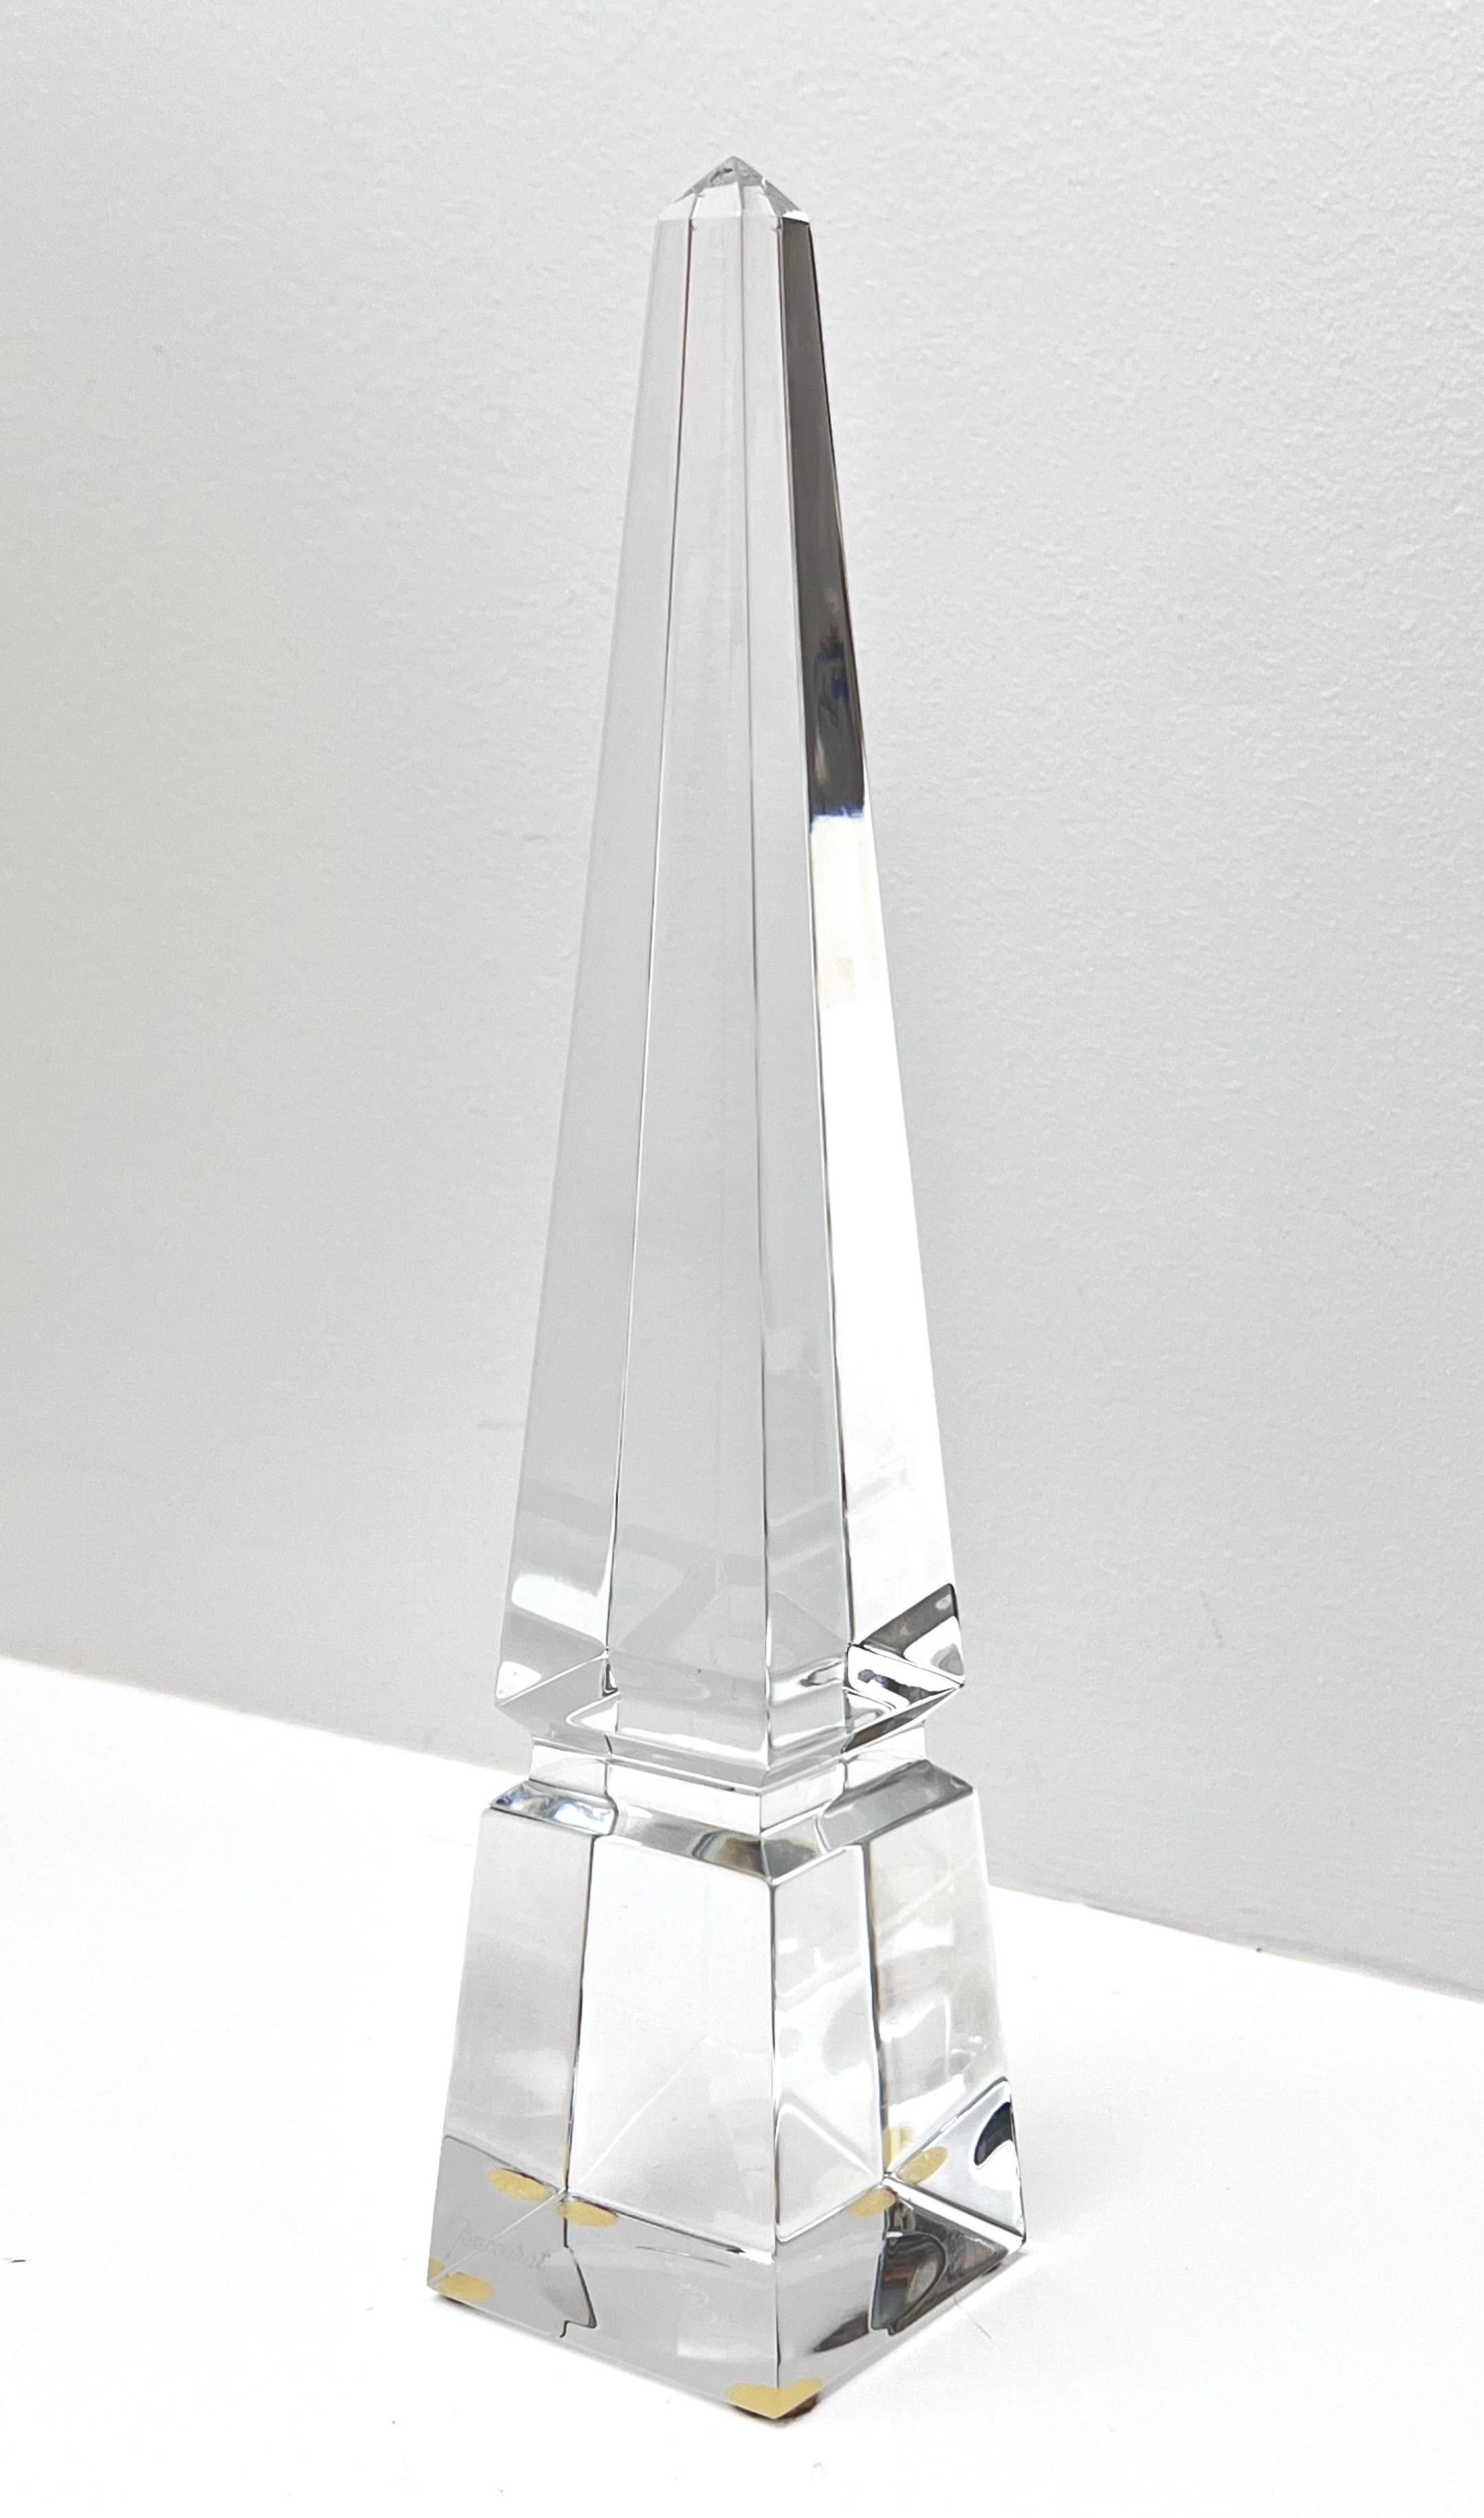 Stunning Baccarat Louxor crystal obelisk in near mint condition.  Great as a gift or to mix with any art glass collection.  Perfect for desk, console or coffee table.  
Signed on the bottom as well as the front of the sculpture.
Does not include the